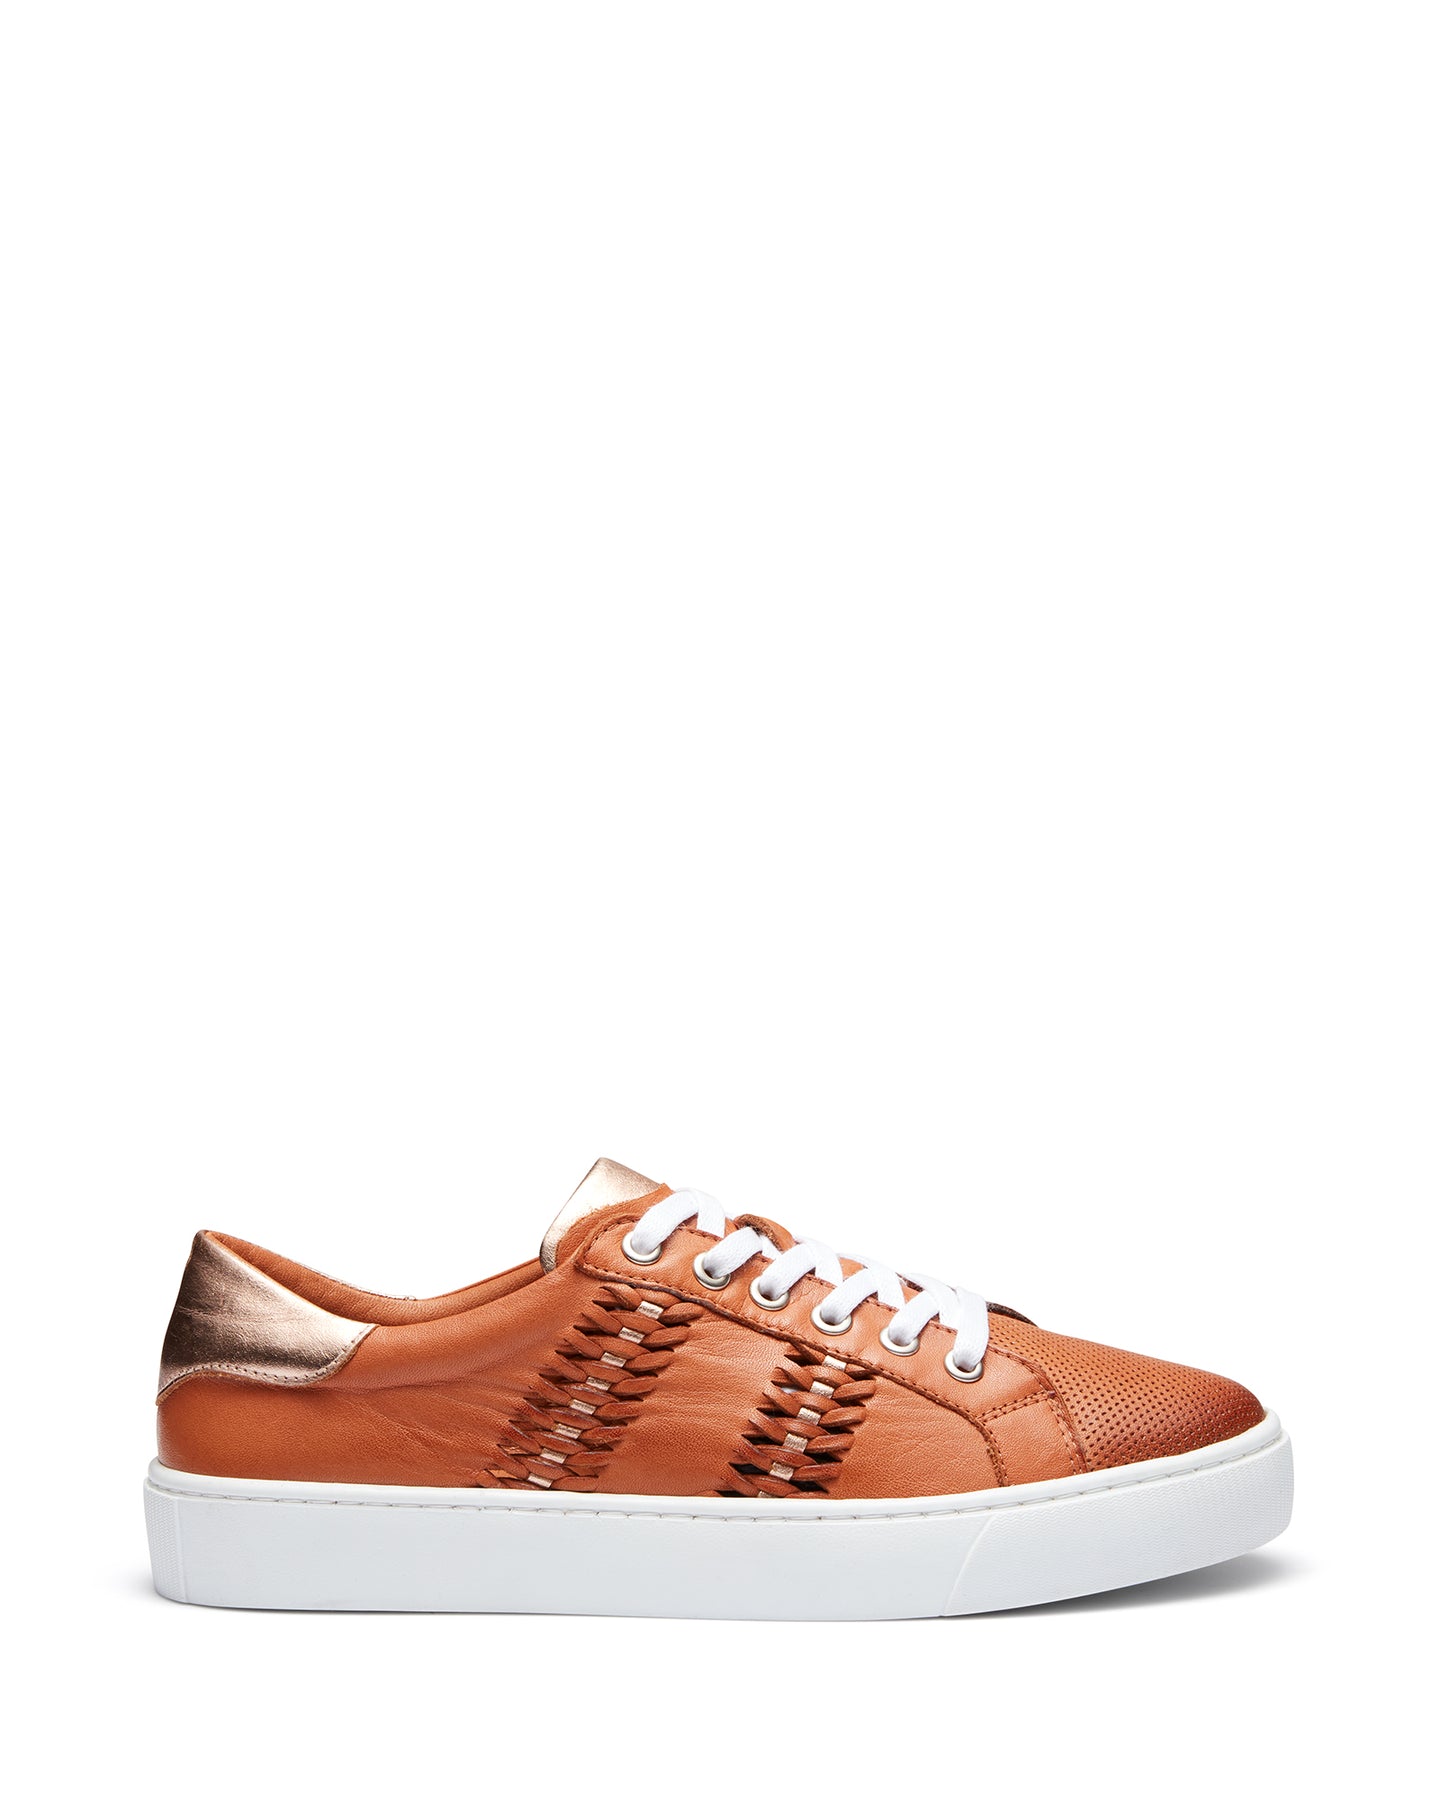 Just Because Shoes Bambi Tan | Leather Sneaker | Lace Up | Low Top